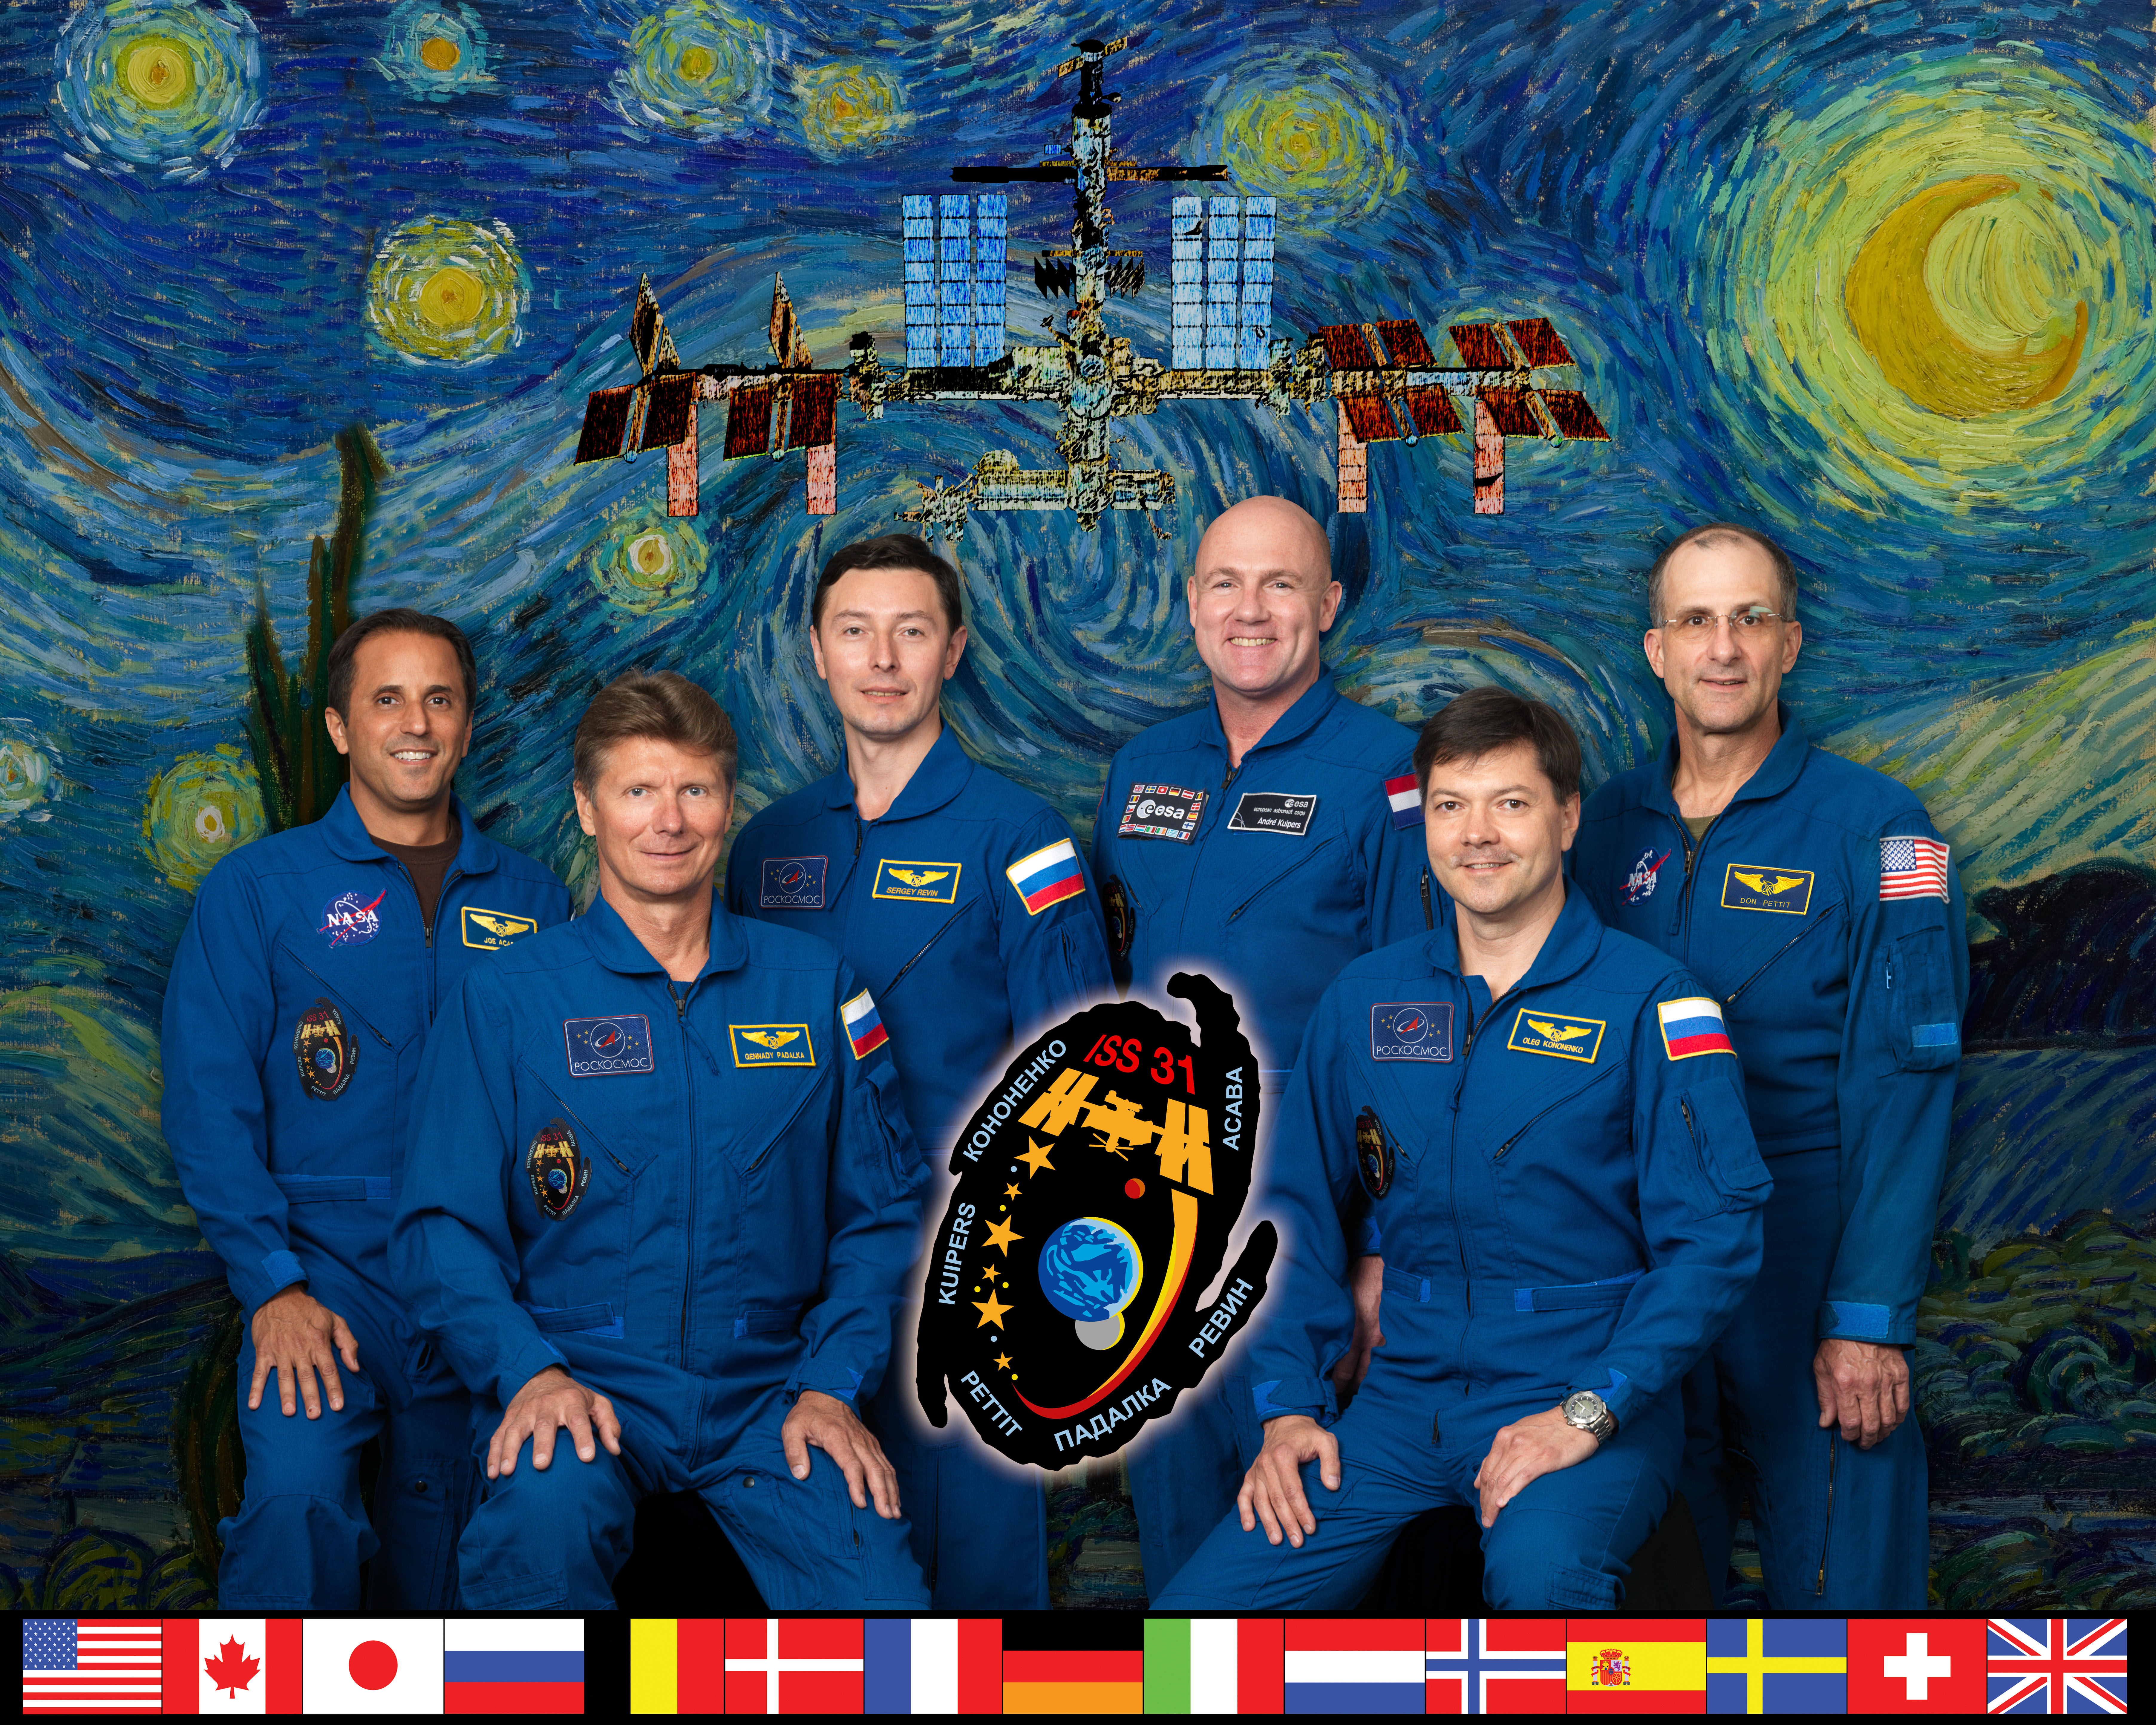 Expedition 31 Official Crew Portrait